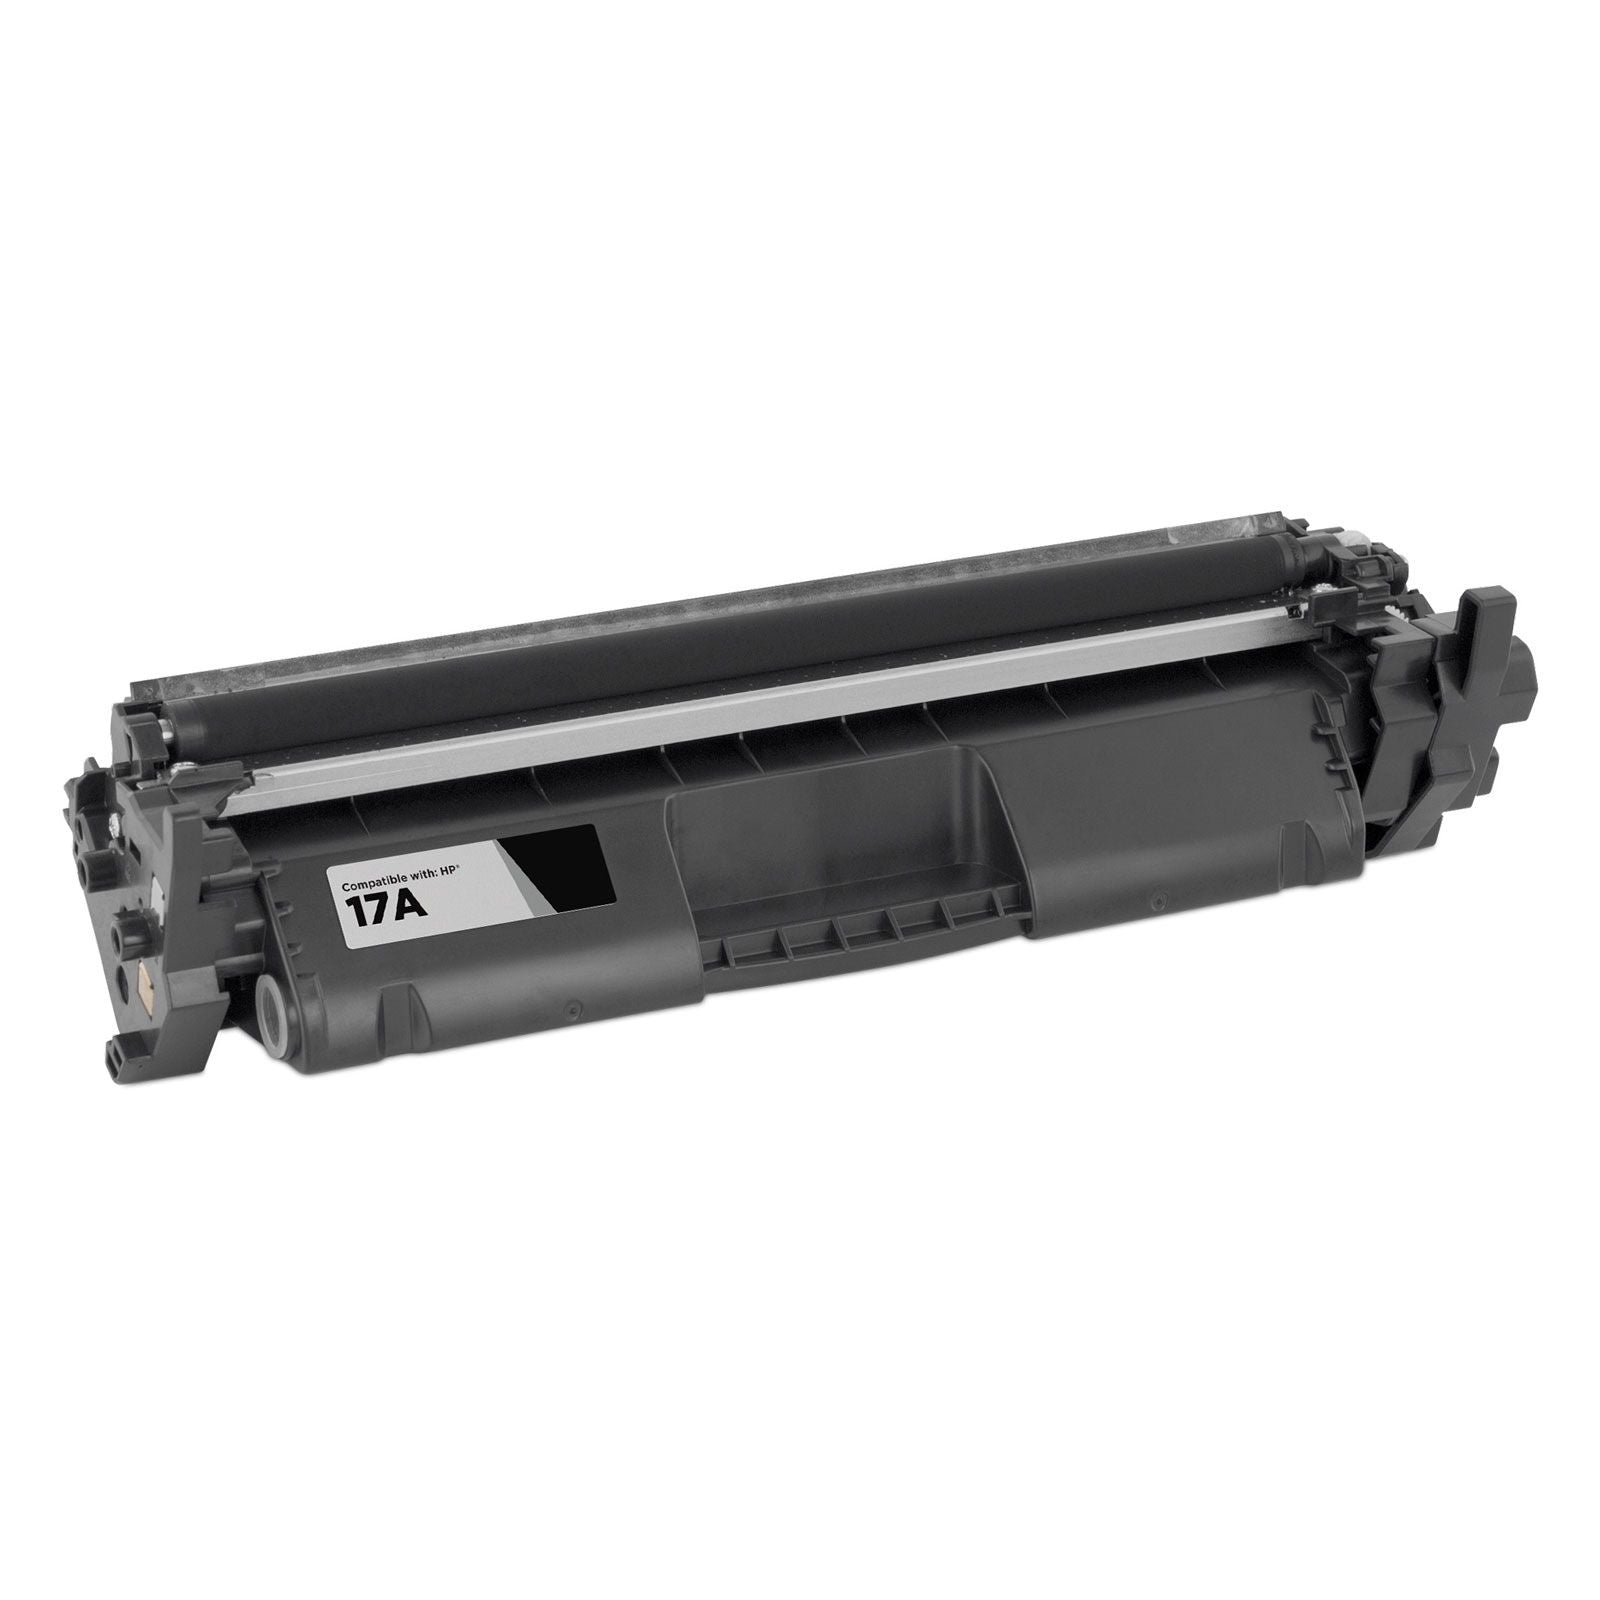 IMPERIAL BRAND Compatible toner cartridge for HP 17A TONER 1.6K PAGES WITH CHIP